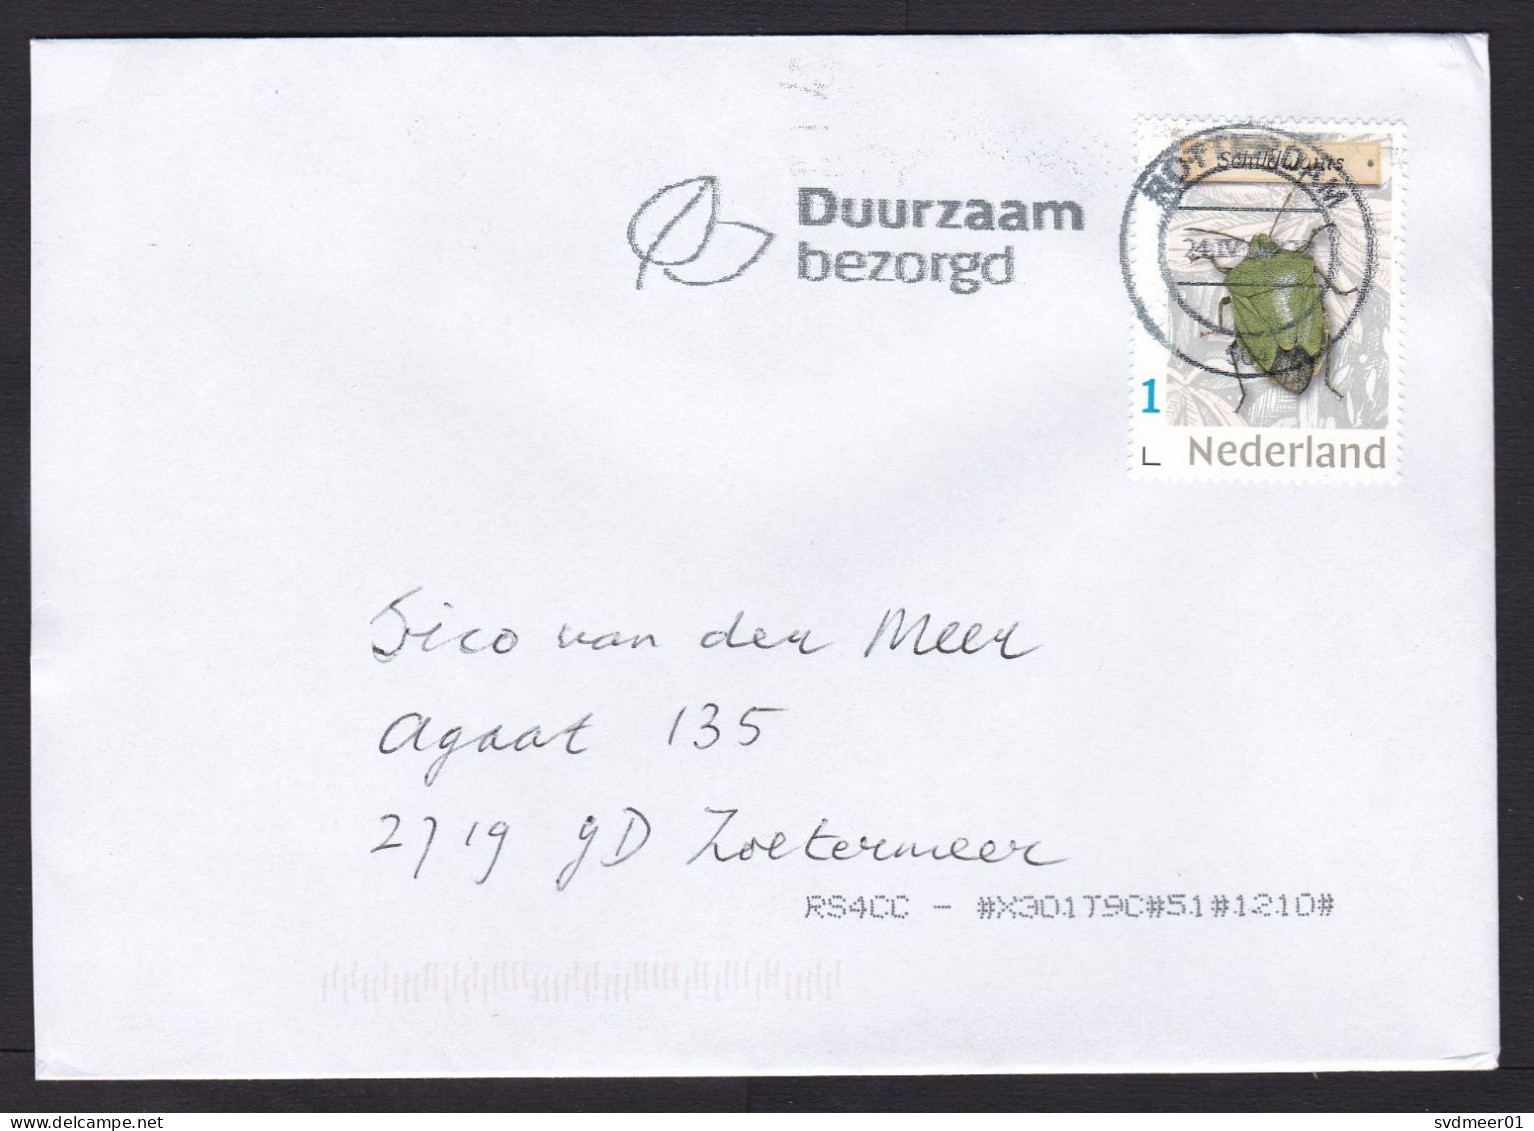 Netherlands: Cover, 2024, 1 Stamp, Bug, Beetle, Insect, Animal (traces Of Use) - Briefe U. Dokumente